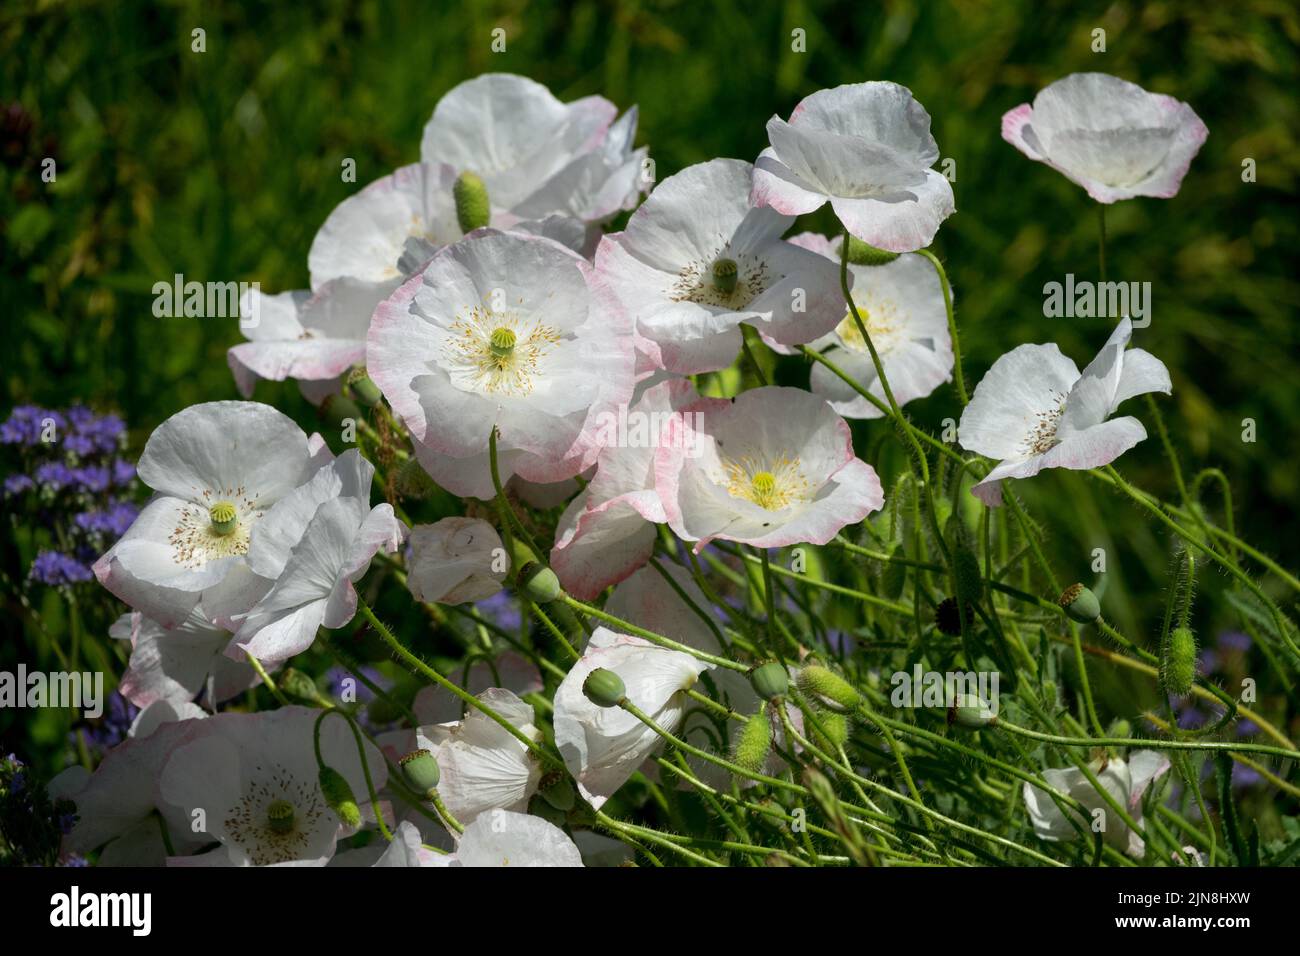 White Papaver rhoeas 'Bridal White', White poppies with pale rose tint, delicate fragile flowers blooming in a garden Stock Photo